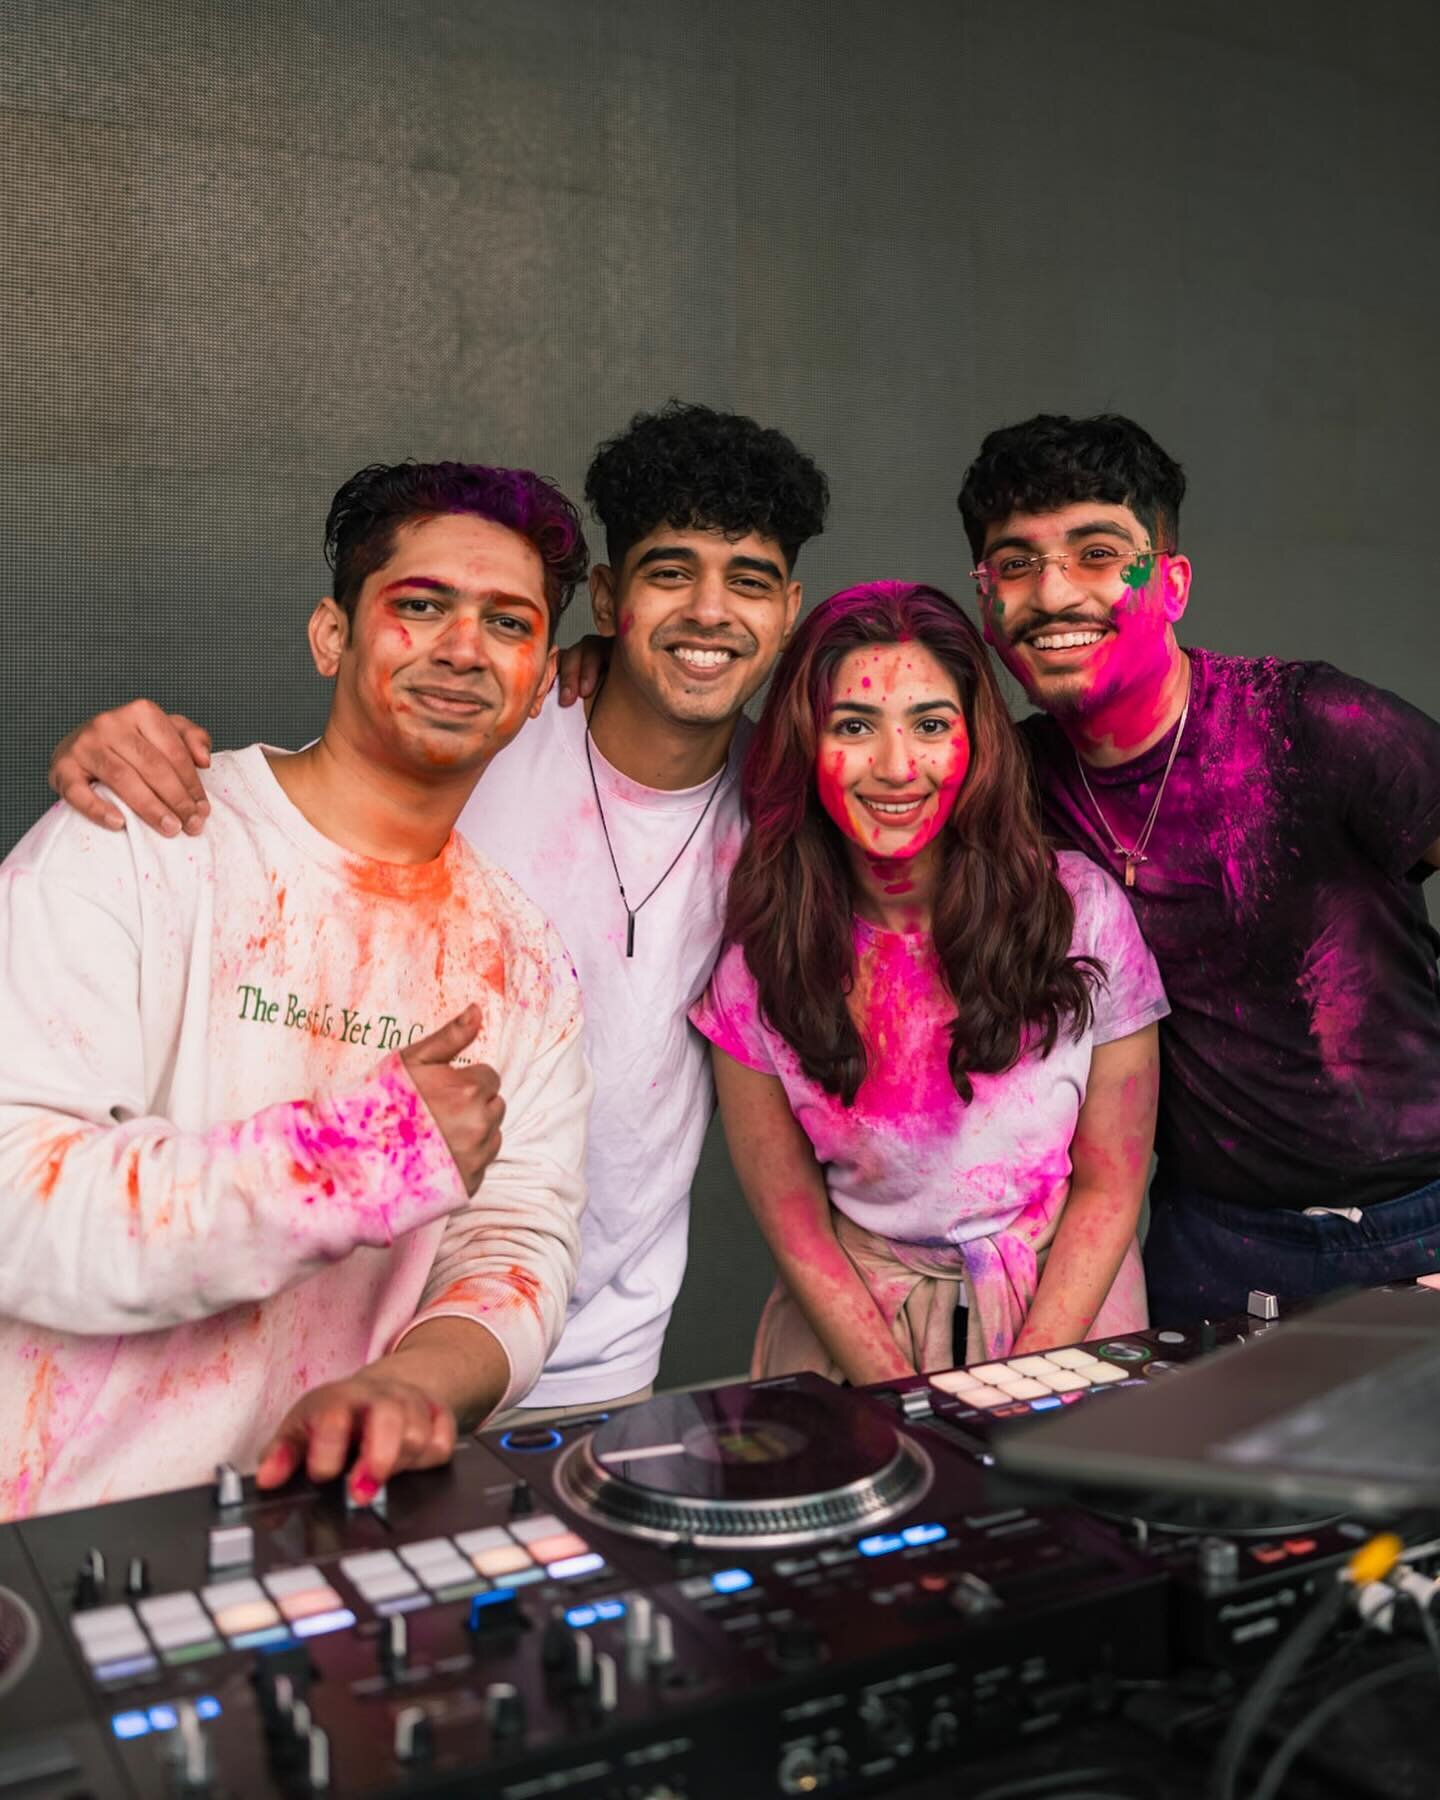 Colour us happy because&hellip; HOLI HAI 🌈 

Thank you for pulling up to HOLI HAI with @isf_sfu and @sfss_events 💞 and making it so fun! Special shoutout to @djsurbee @raytrixofficial @shalv.m and @djsabzii for keeping us dancing 5 hours straight ?